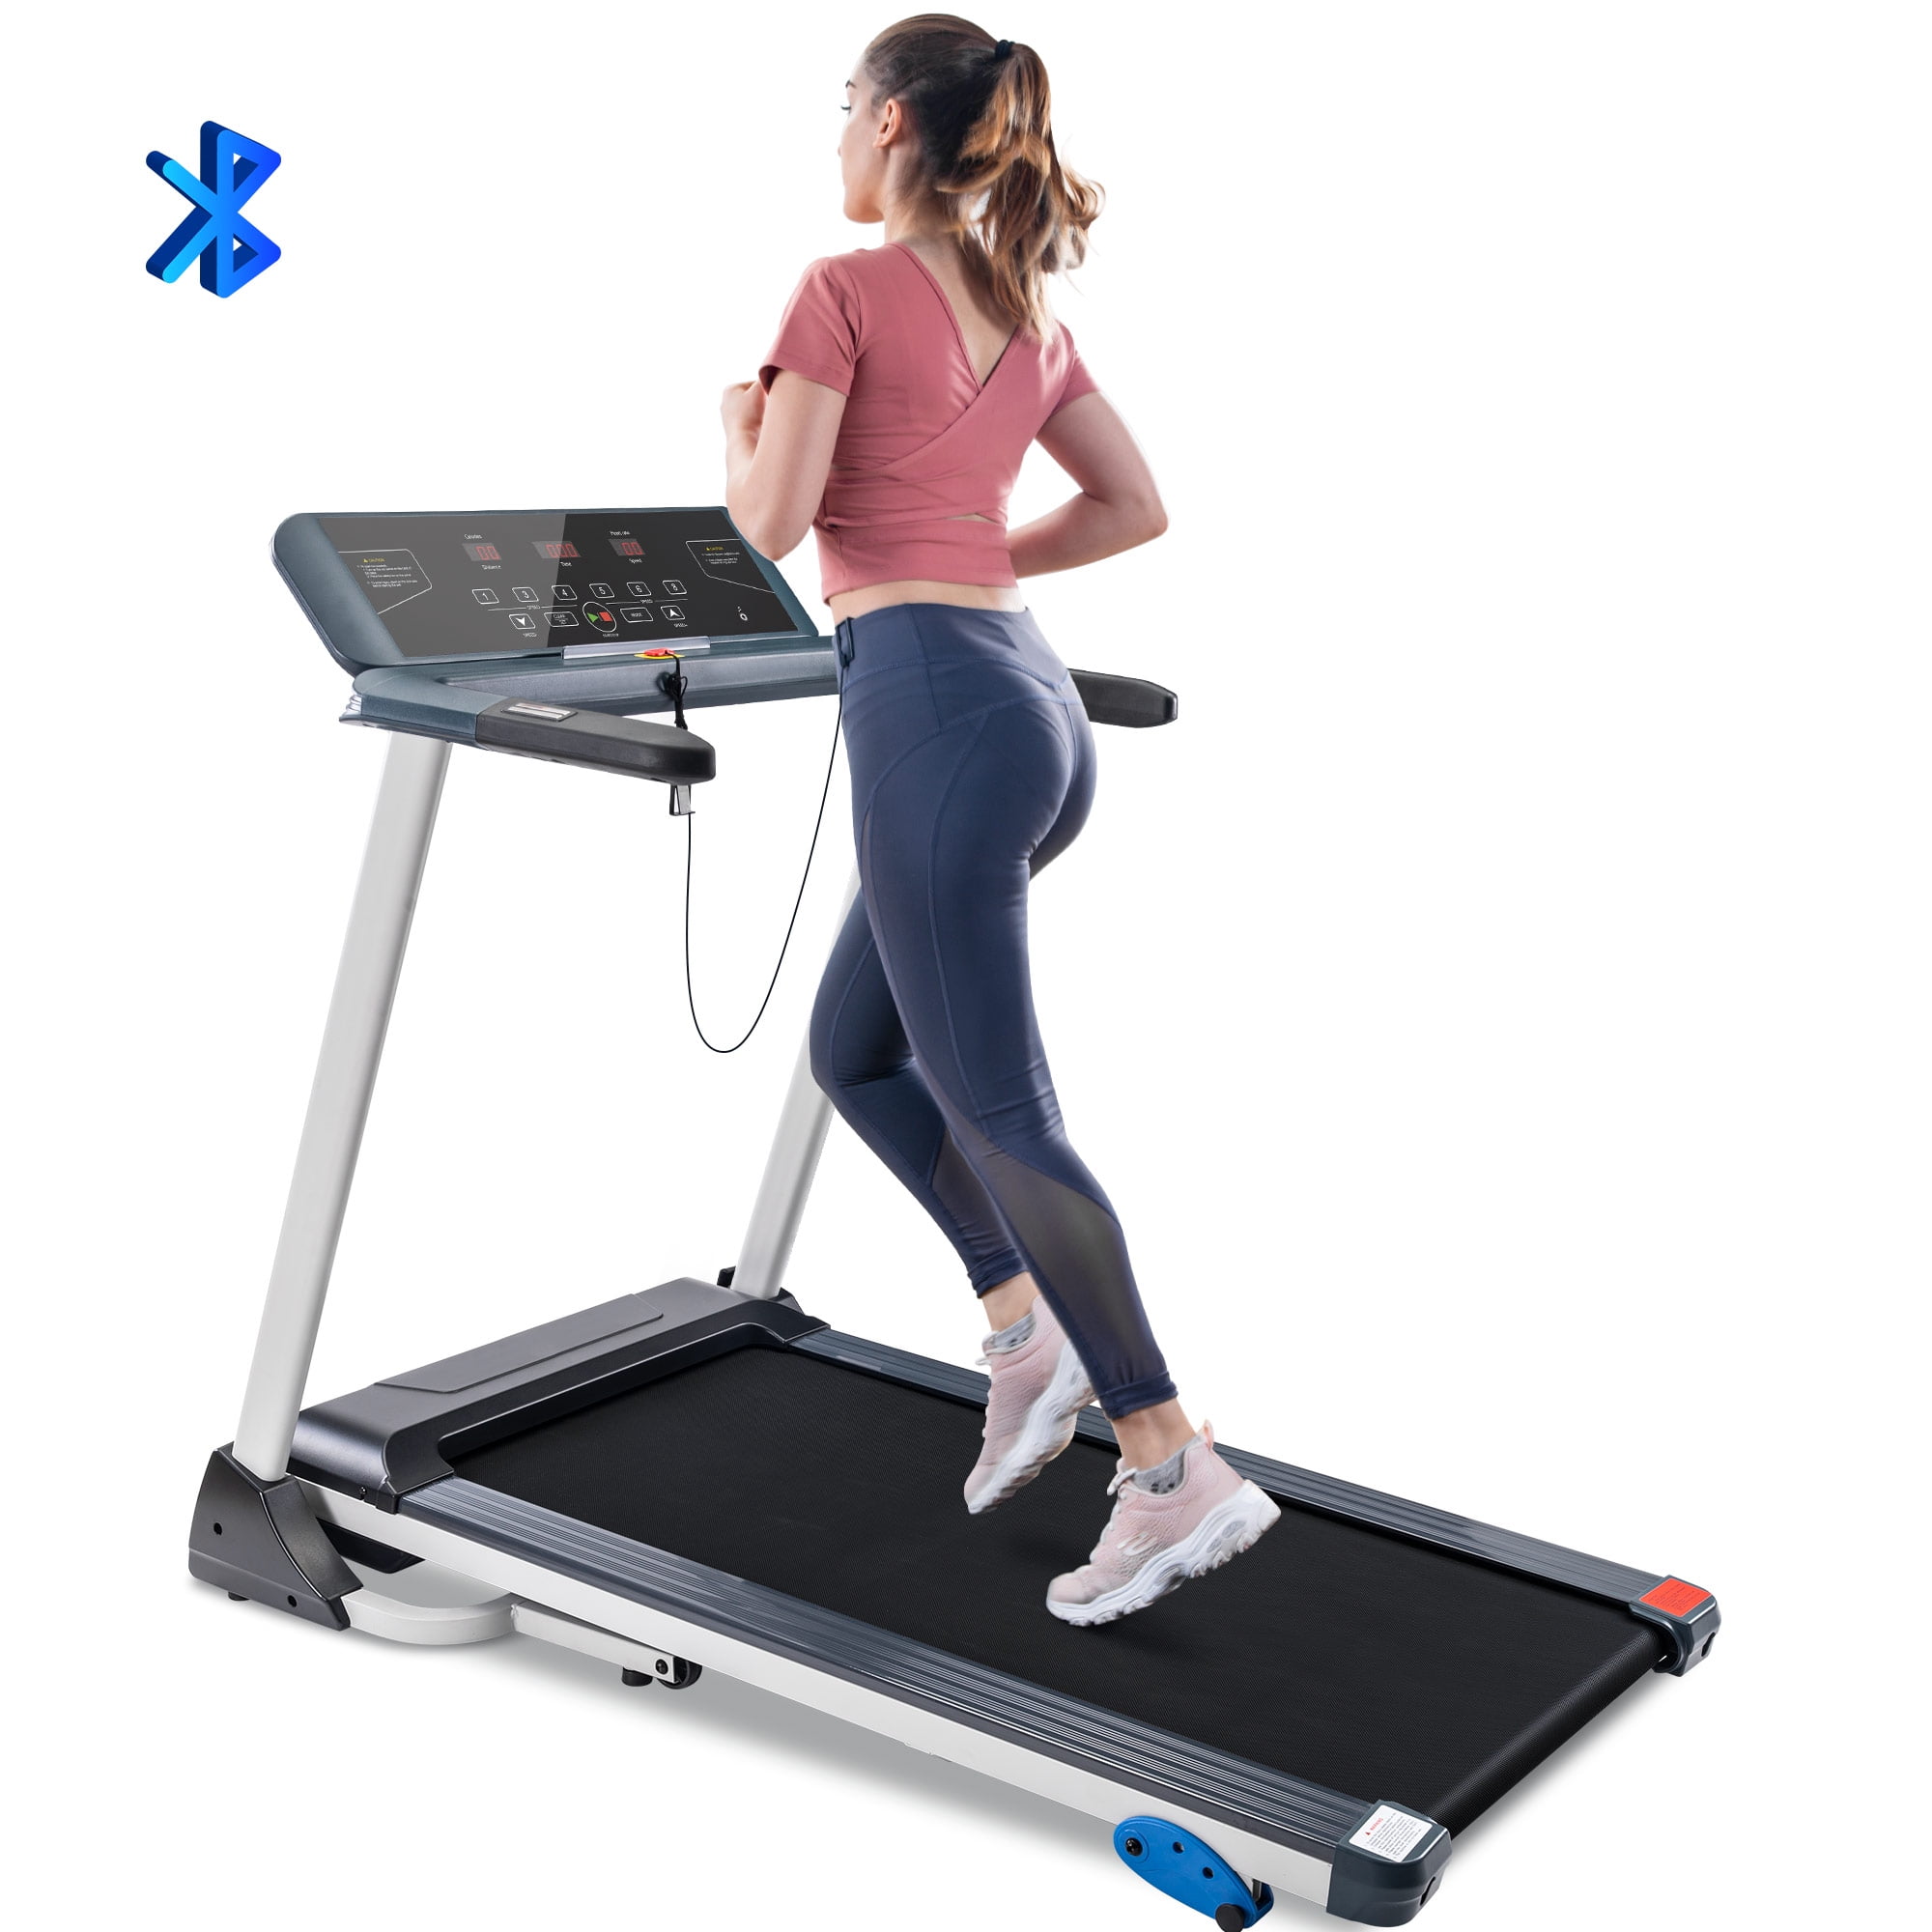 Details about   Home Folding Treadmill Electric Motorized Power Running Jogging Fitness Machine